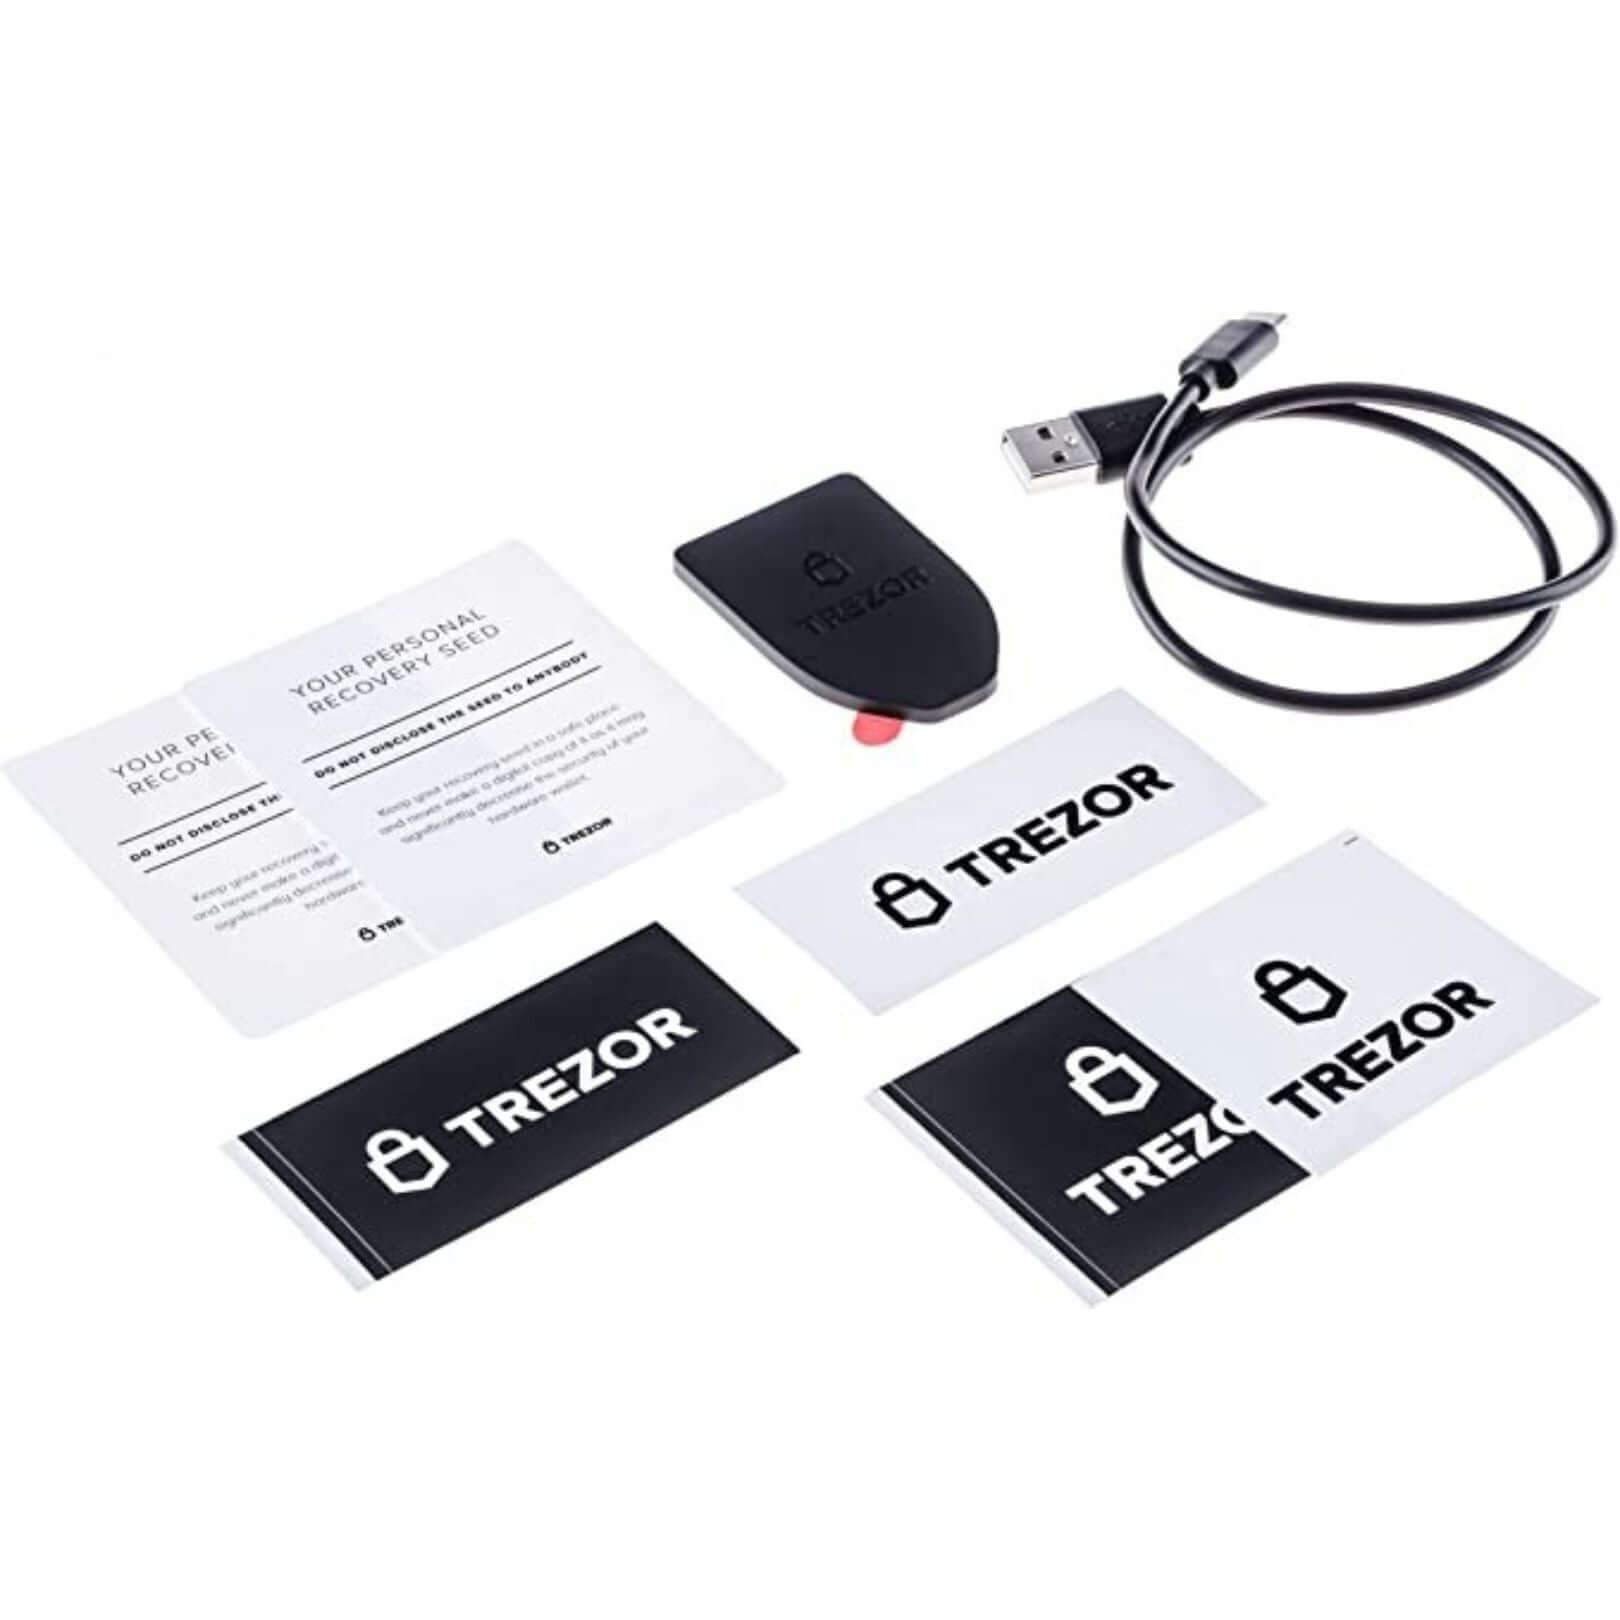 The Trezor Model T crypto hardware wallet is shown unboxed on a white background alongside the accompanying items that come in the box..